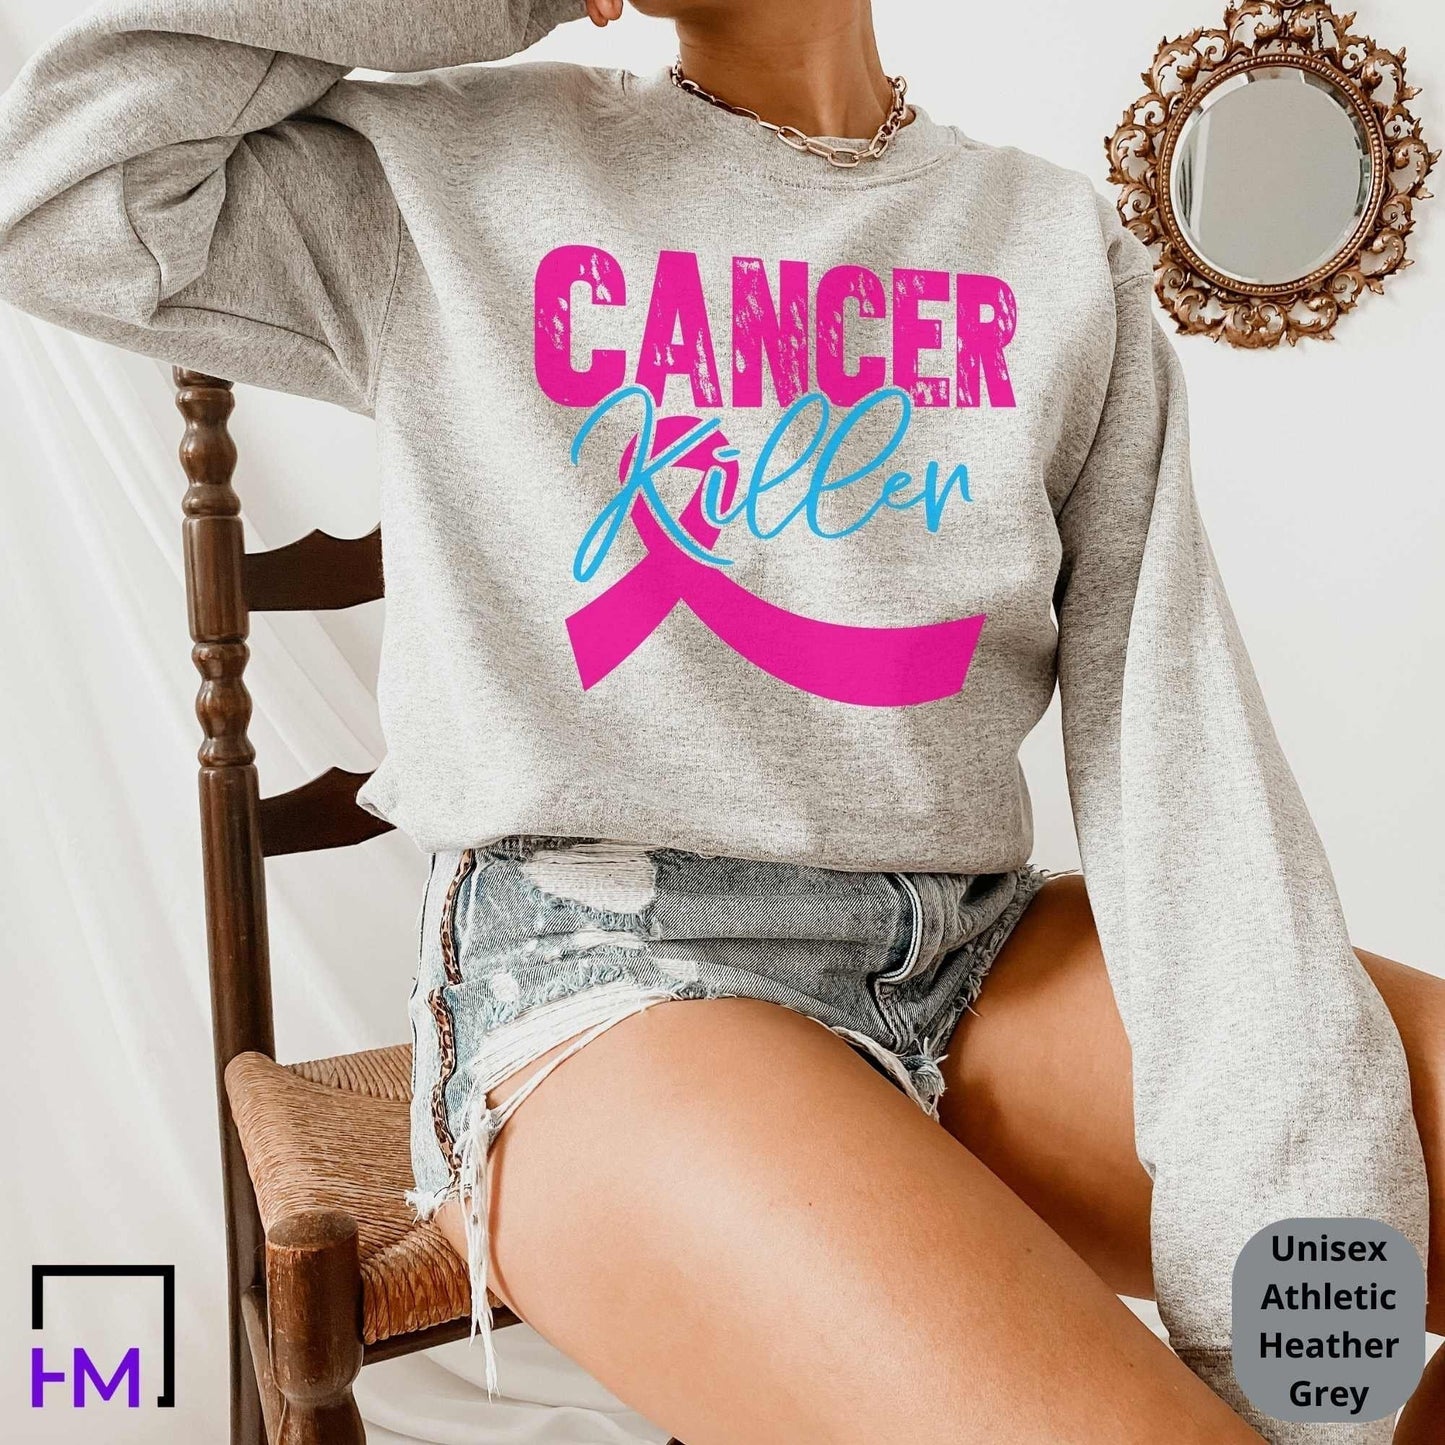 Fight Cancer in Every Color T-shirt, World Cancer Awareness Gift, Cancer Ribbon Tee, Cancer Survivor Sweater, Pink Cancer Support Sweatshirt HMDesignStudioUS